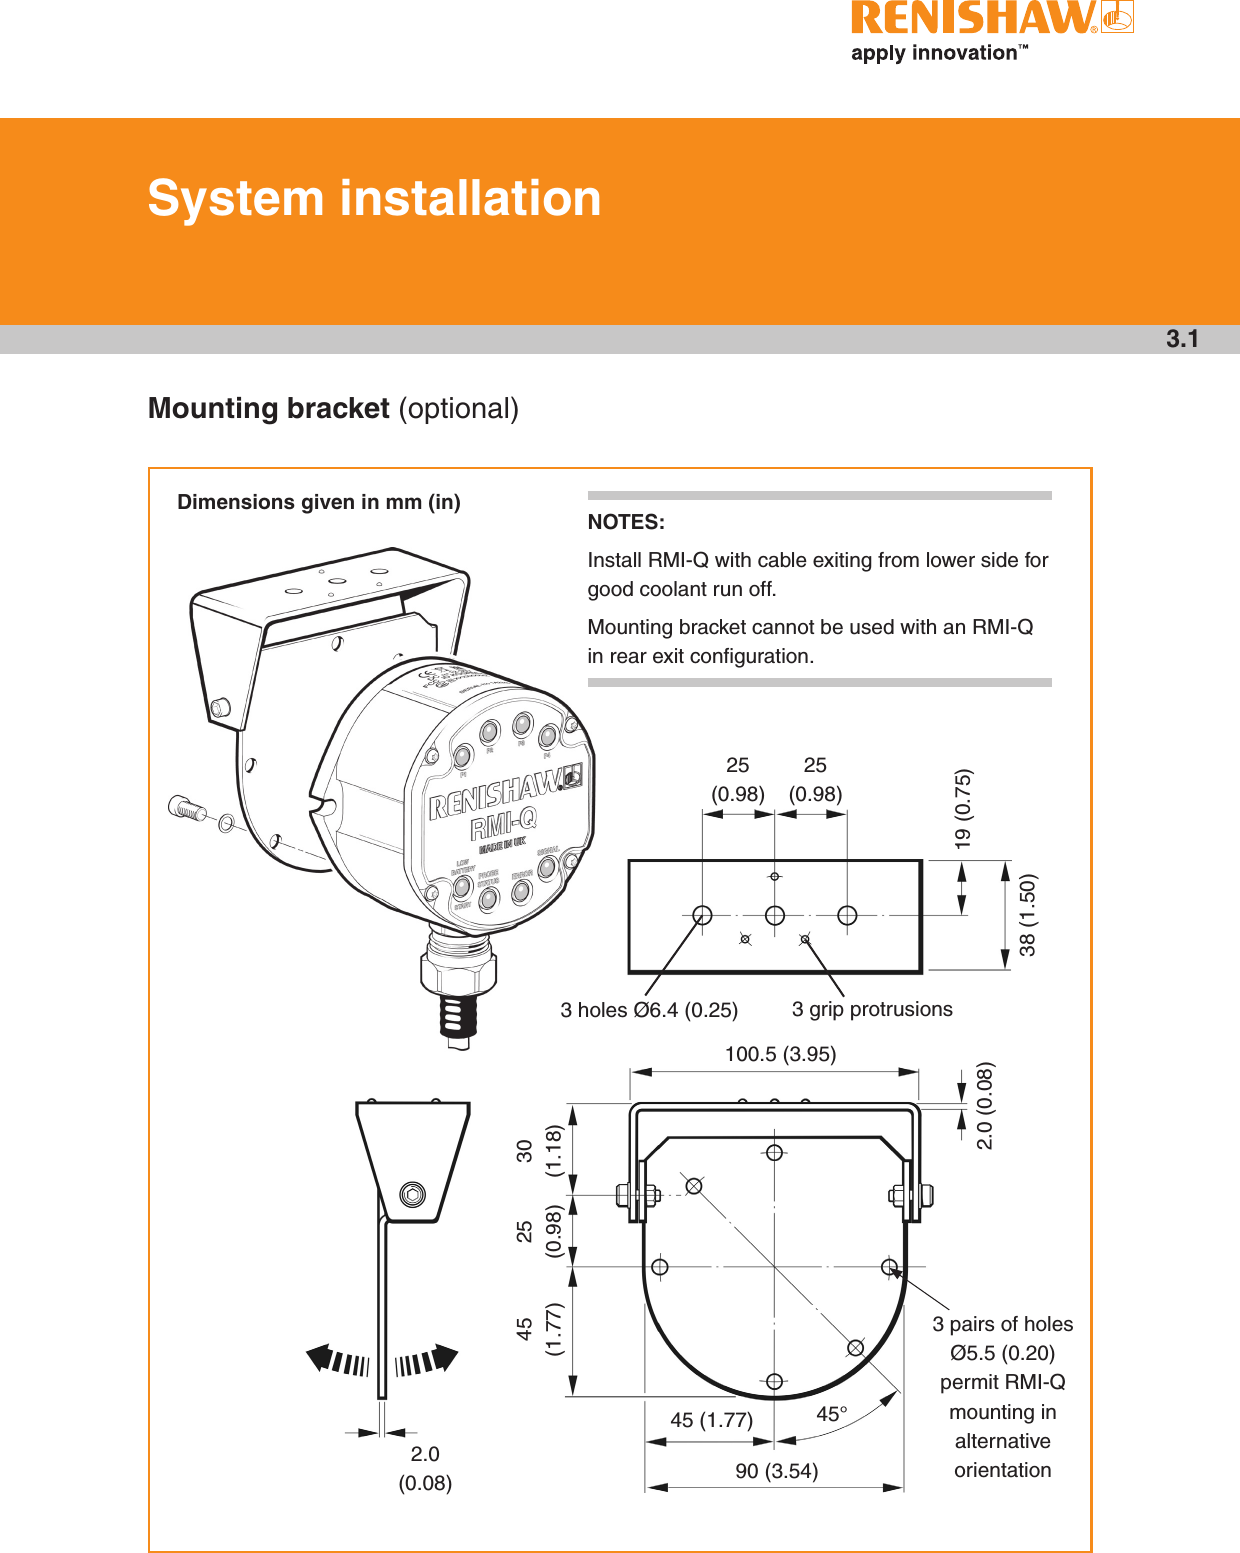 3.1Mounting bracket (optional)System installationDimensions given in mm (in)25 (0.98)25 (0.98)19 (0.75)38 (1.50)3 grip protrusions100.5 (3.95)2.0 (0.08)30 (1.18)25 (0.98)45 (1.77)45 (1.77) 45°90 (3.54)3 pairs of holes Ø5.5 (0.20) permit RMI-Q mounting in alternative orientation2.0 (0.08)3 holes Ø6.4 (0.25)NOTES: Install RMI-Q with cable exiting from lower side for good coolant run off.  Mounting bracket cannot be used with an RMI-Q in rear exit conﬁguration.